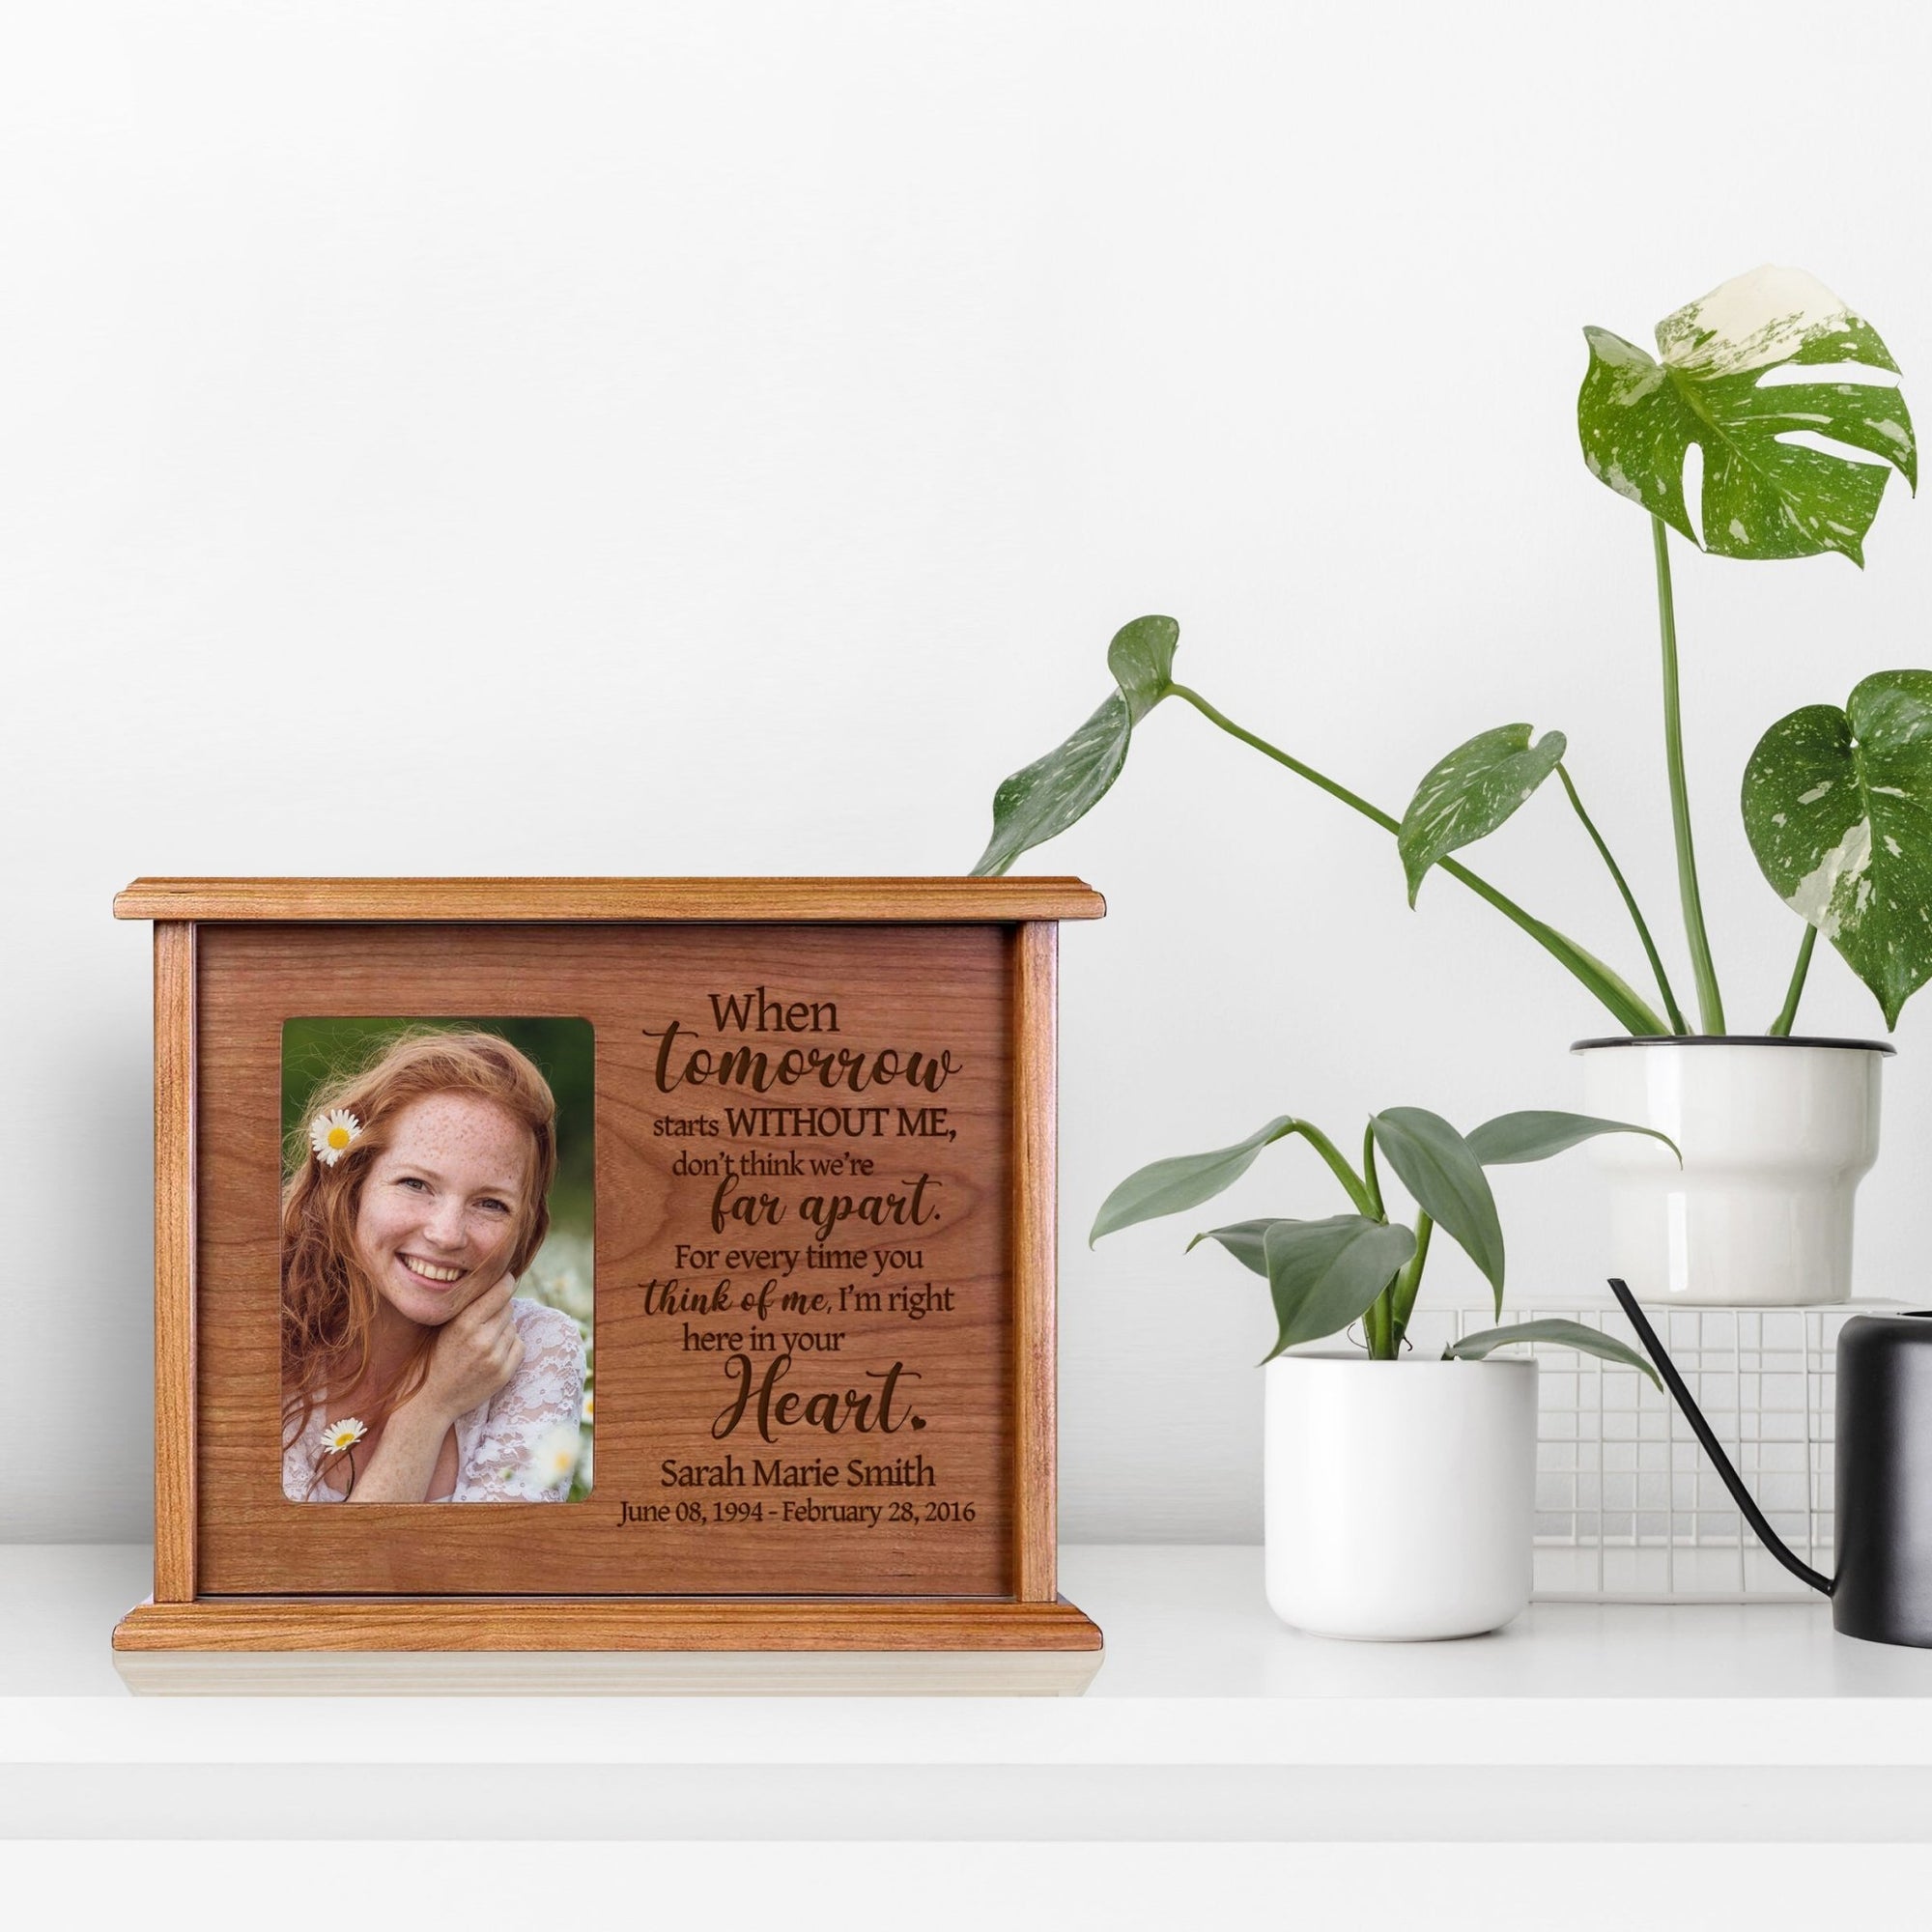 Decorative Photo Cremation Urn for Human Ashes placed on the table, cabinet or mantel